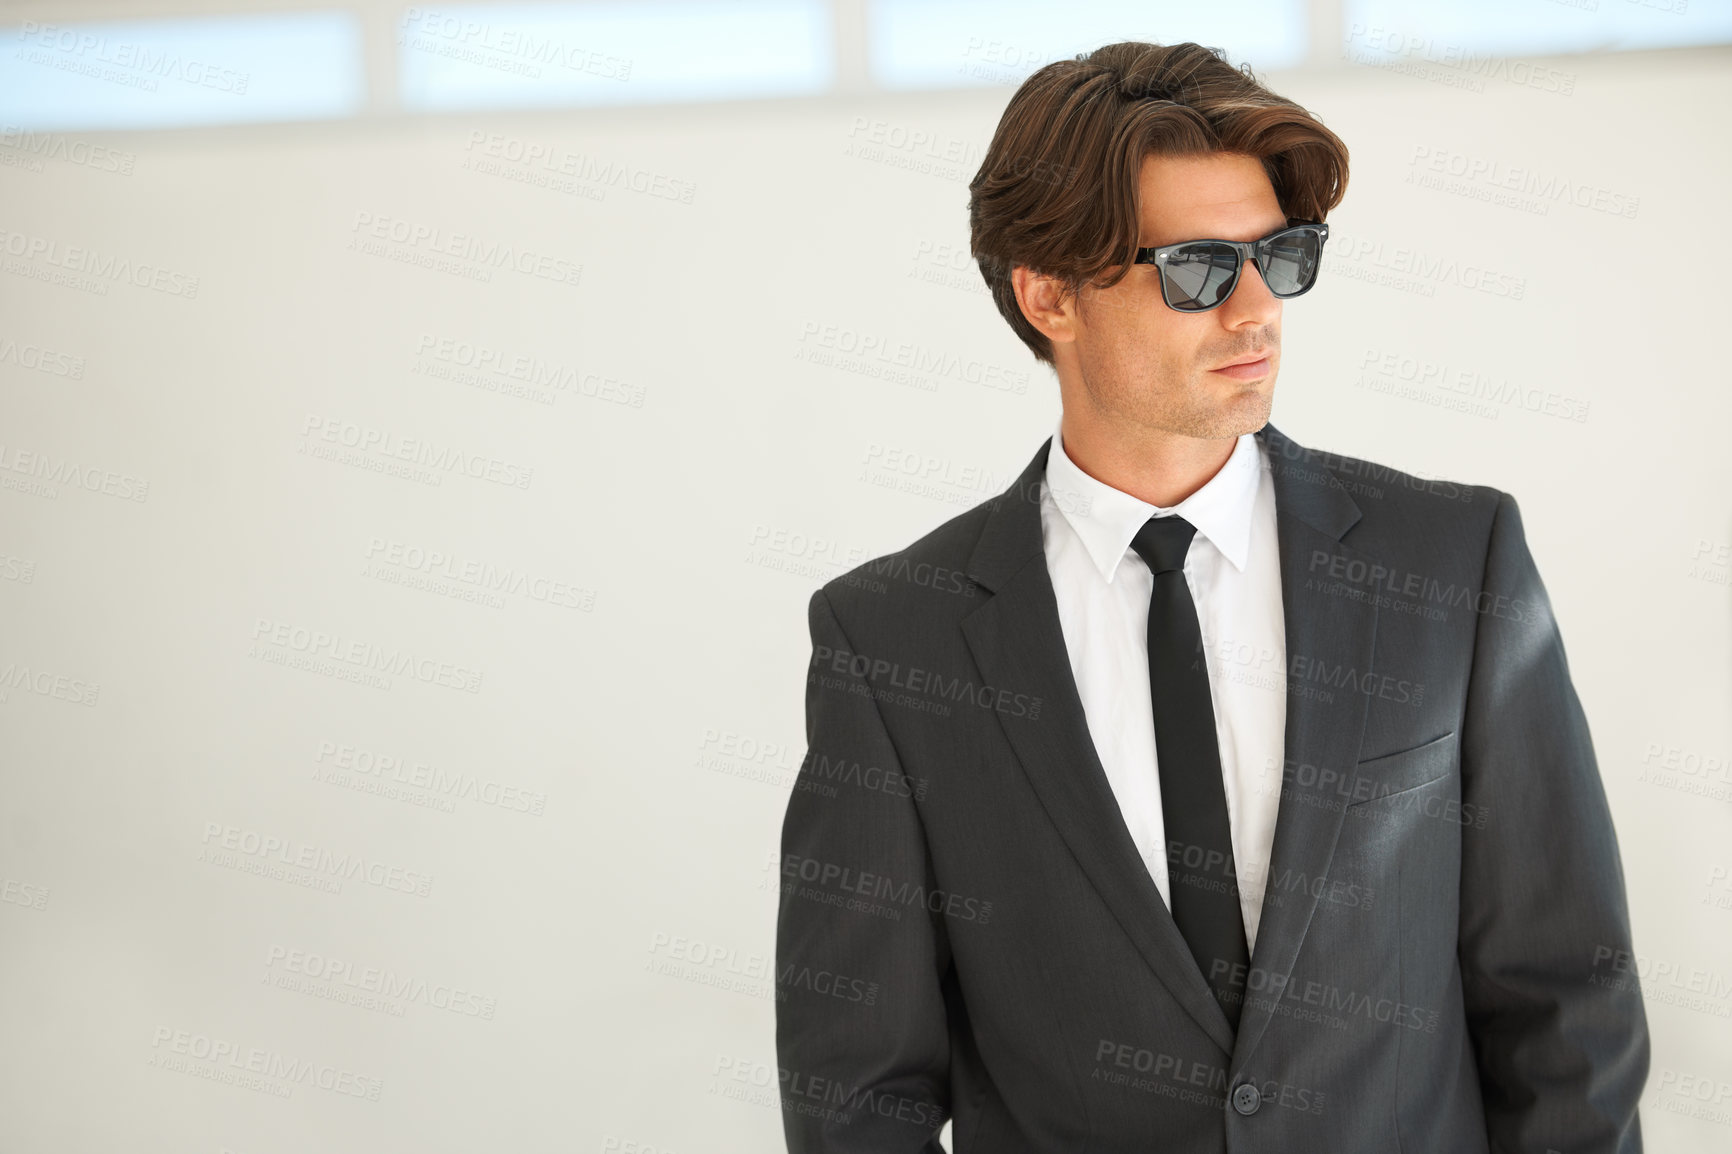 Buy stock photo Confidence, attitude and business man in office with glasses, attitude or empowered on wall background. Leader, mindset and cool male entrepreneur thinking, edgy and posing with leadership or focus